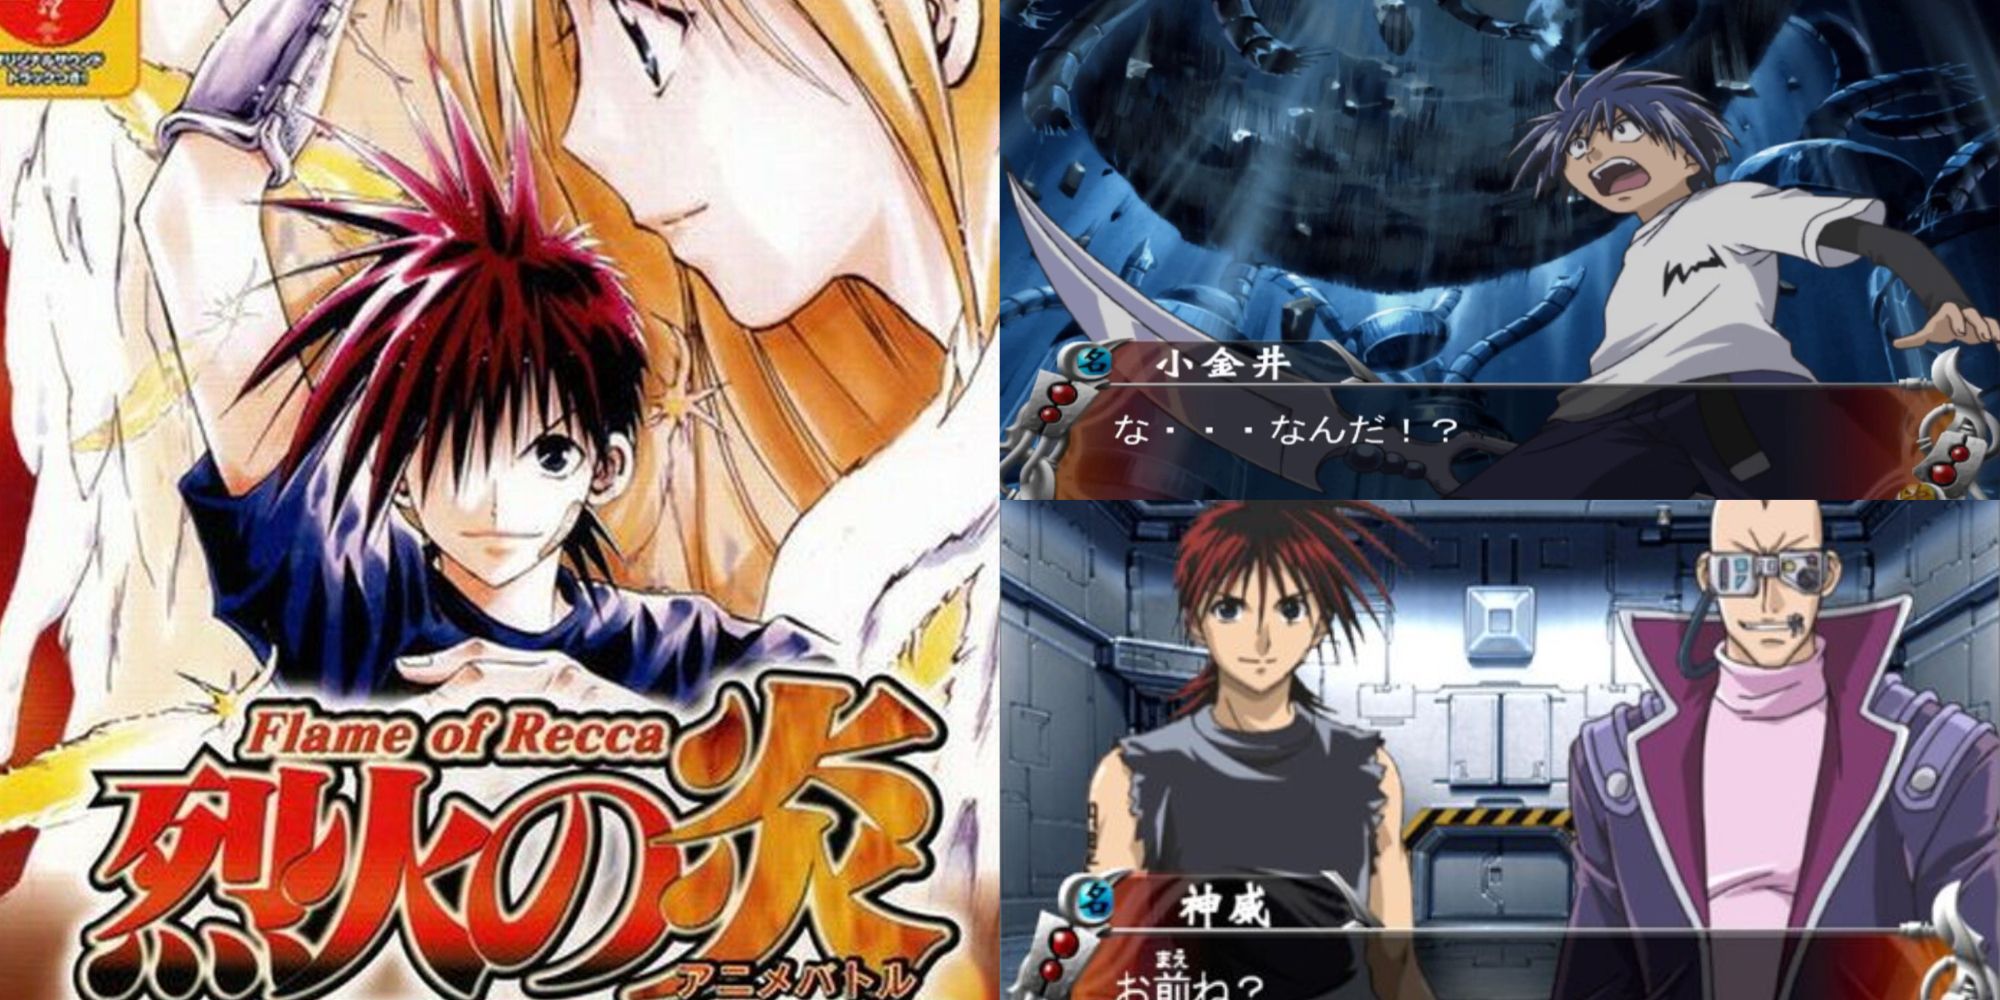 Cover art of game on the left with Recca and Yanagi, and screenshots from the game on the right